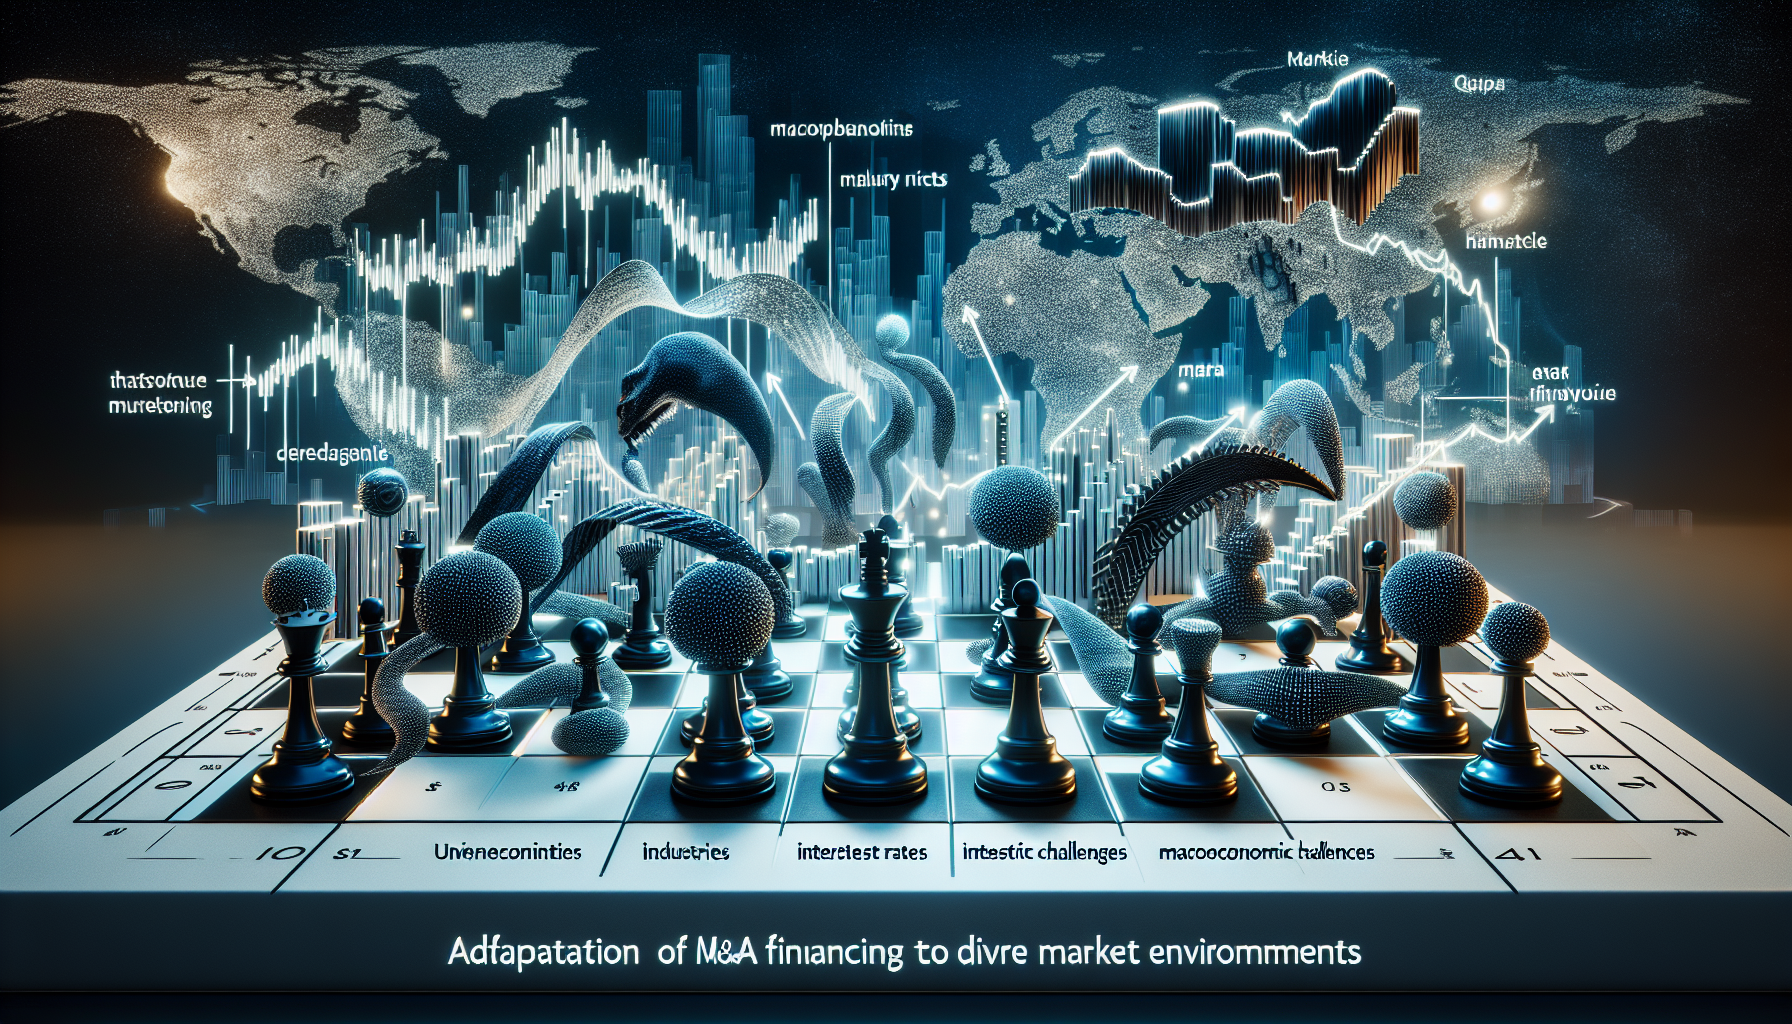 Illustration of Financing M&A in Different Market Environments